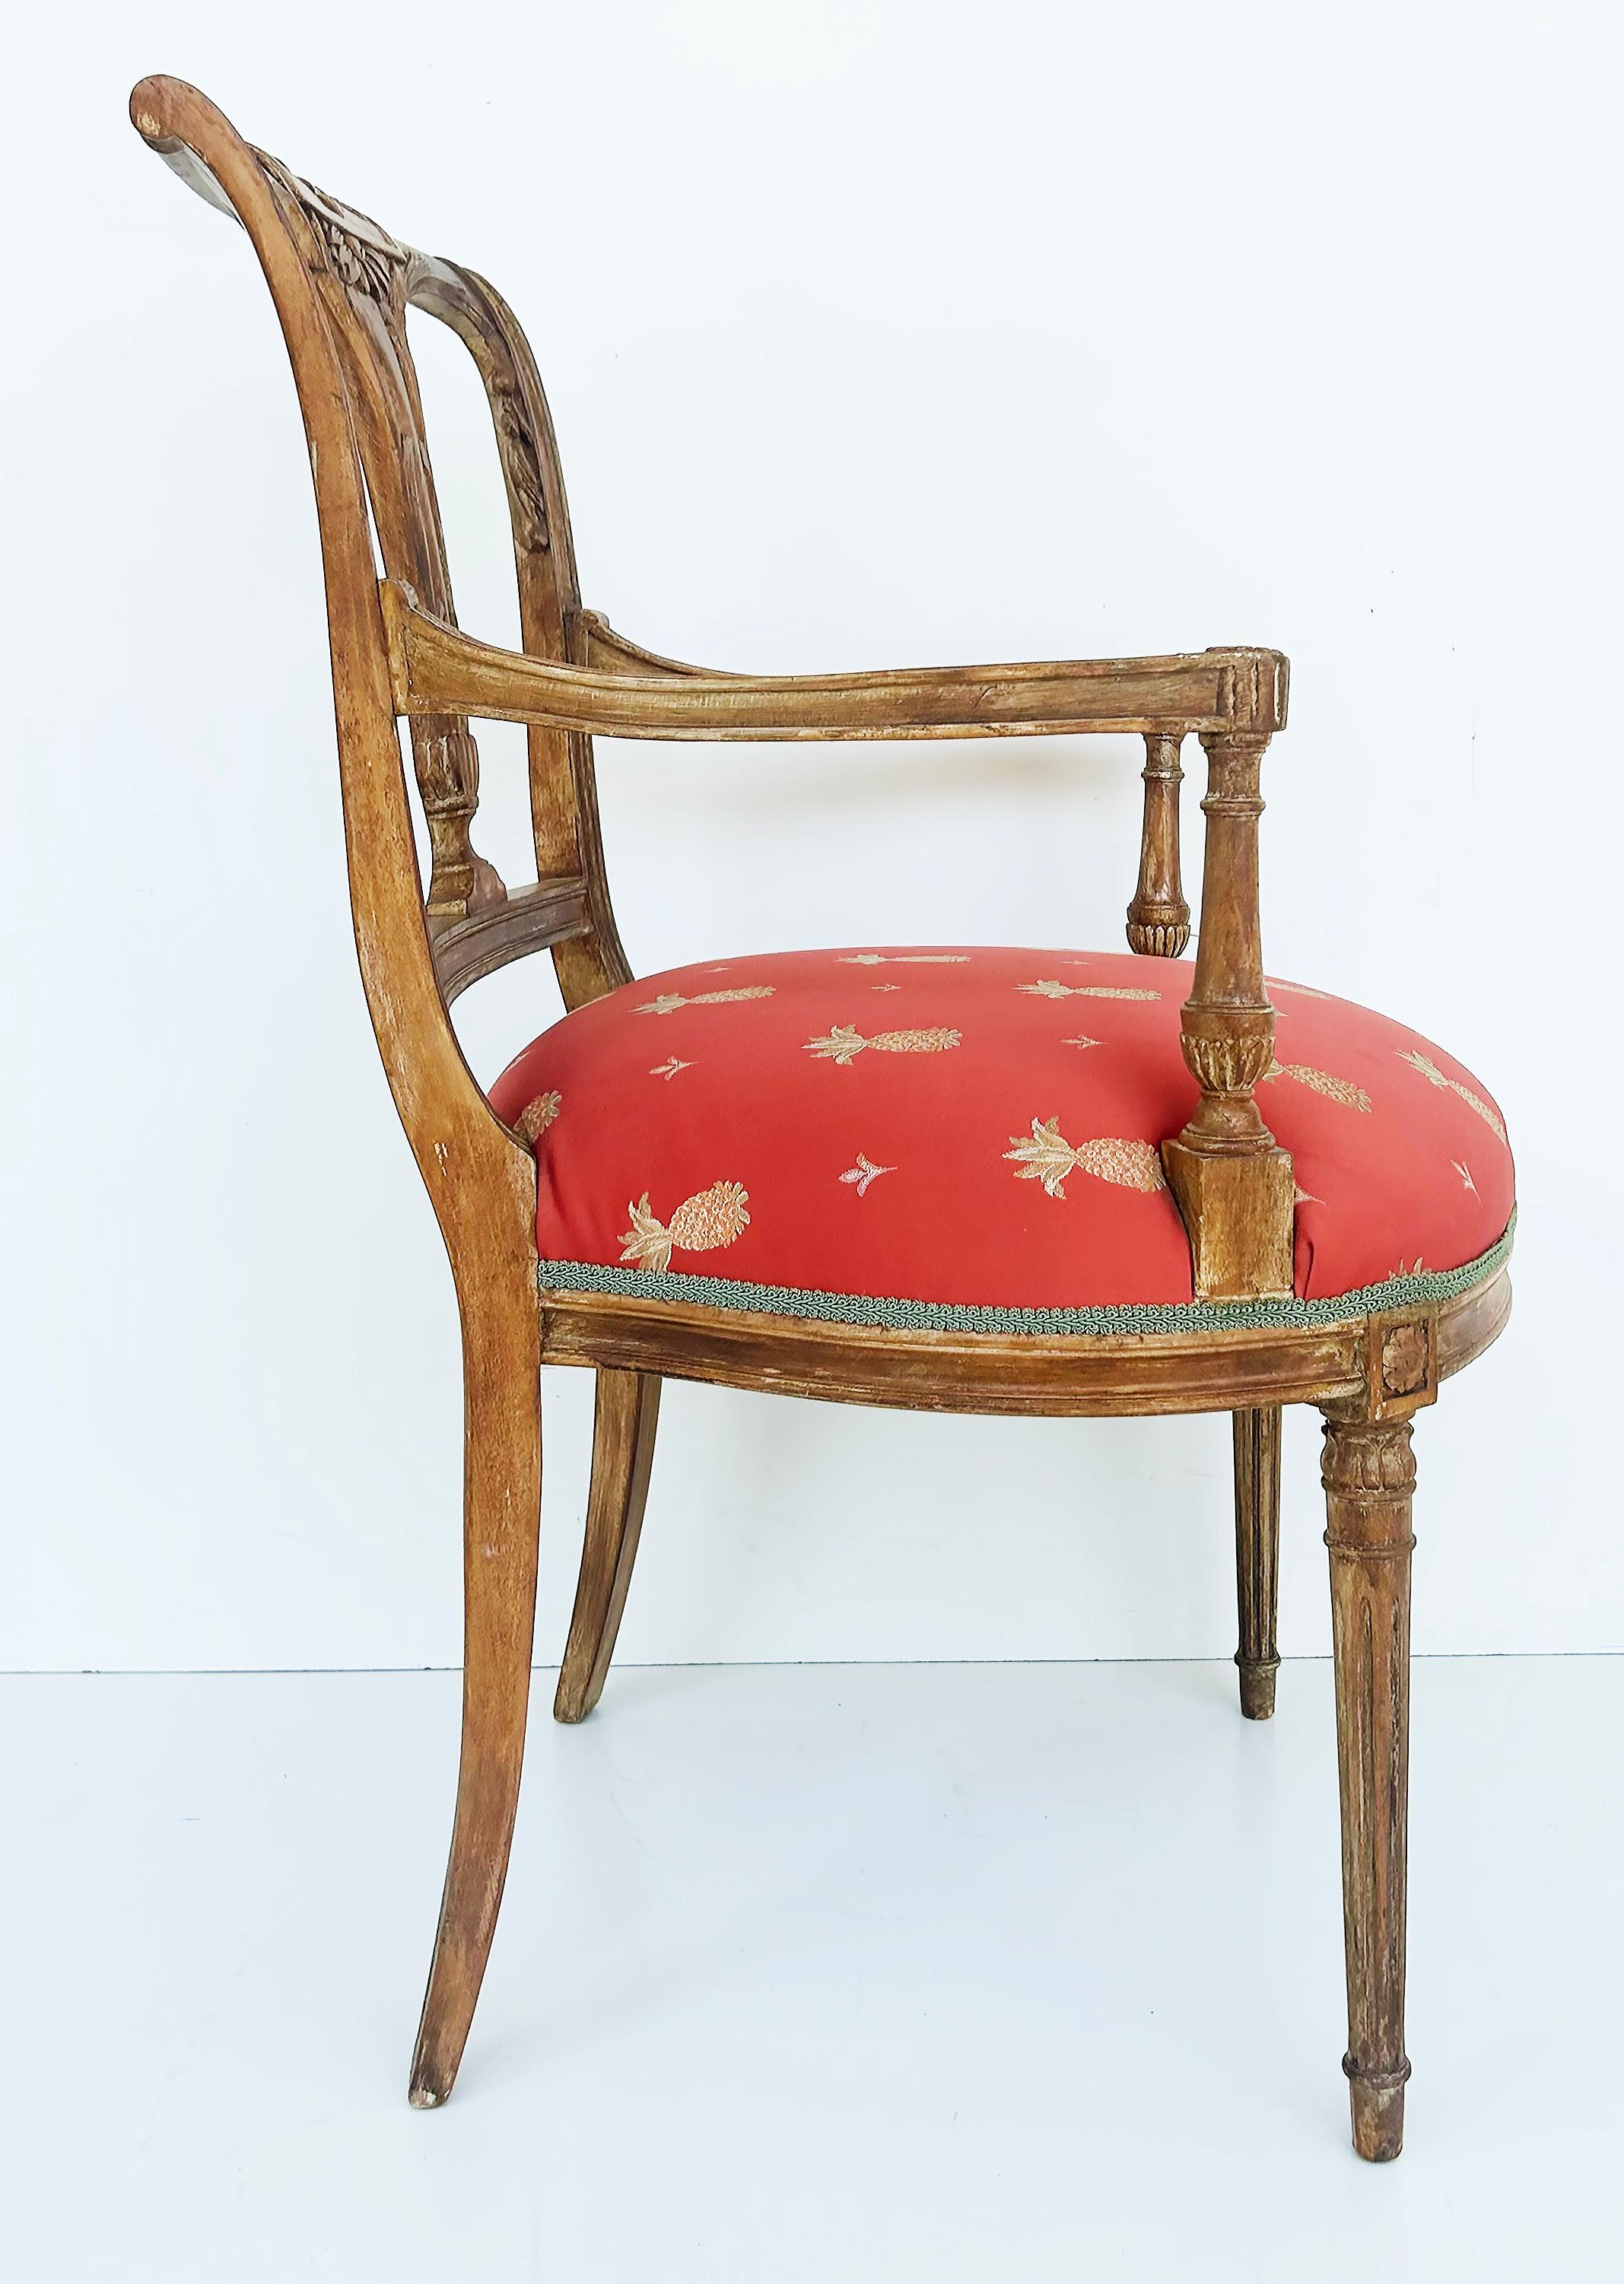 20th Century Antique Carved Venetian Plastered Wood Armchairs with Pineapple Seats For Sale